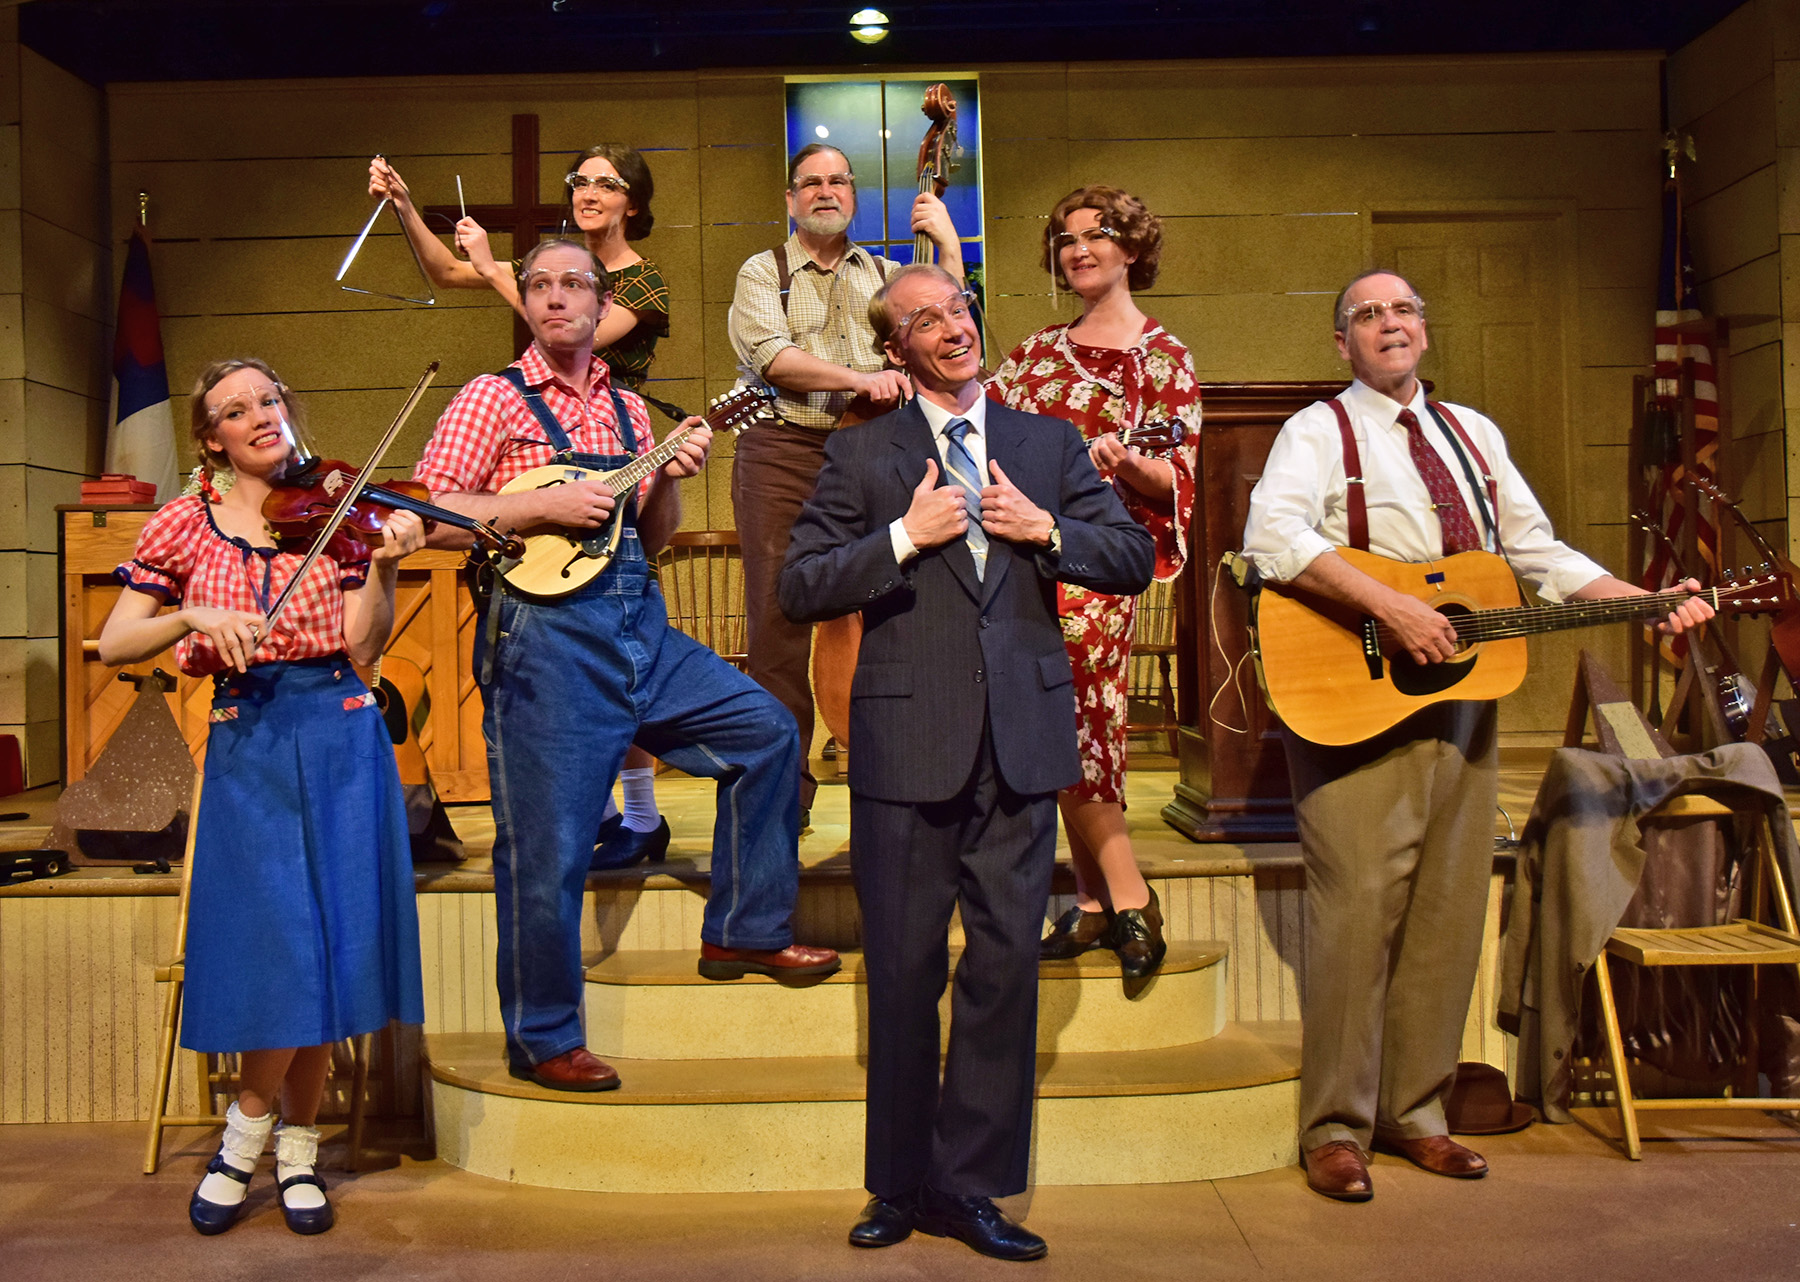 Beef & Boards Dinner Theatre presents the Bluegrass Gospel musical comedy 